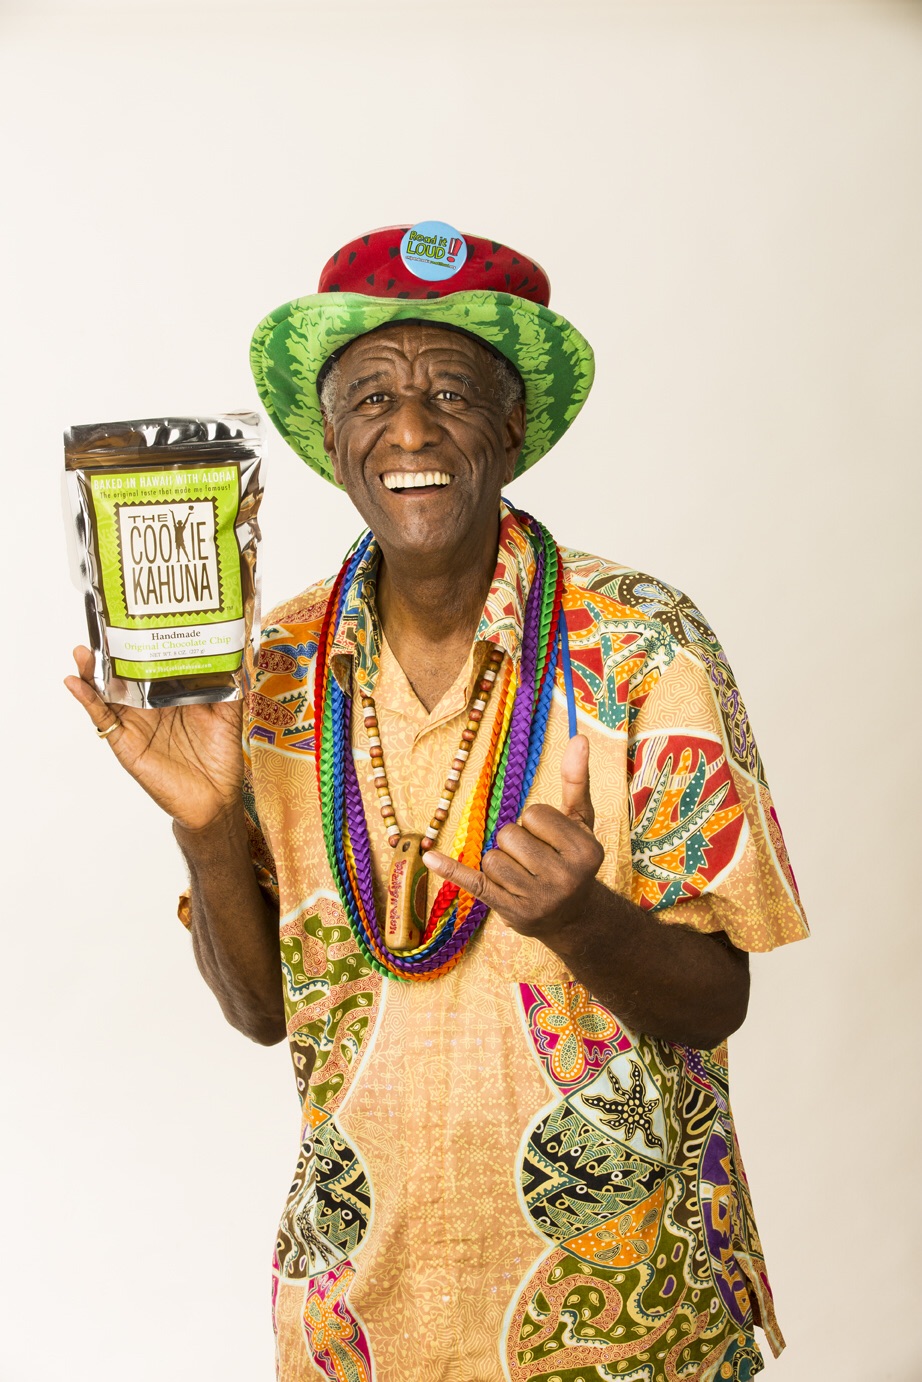 Wally Amos with his newest gourmet offering the Cookie Kahuna